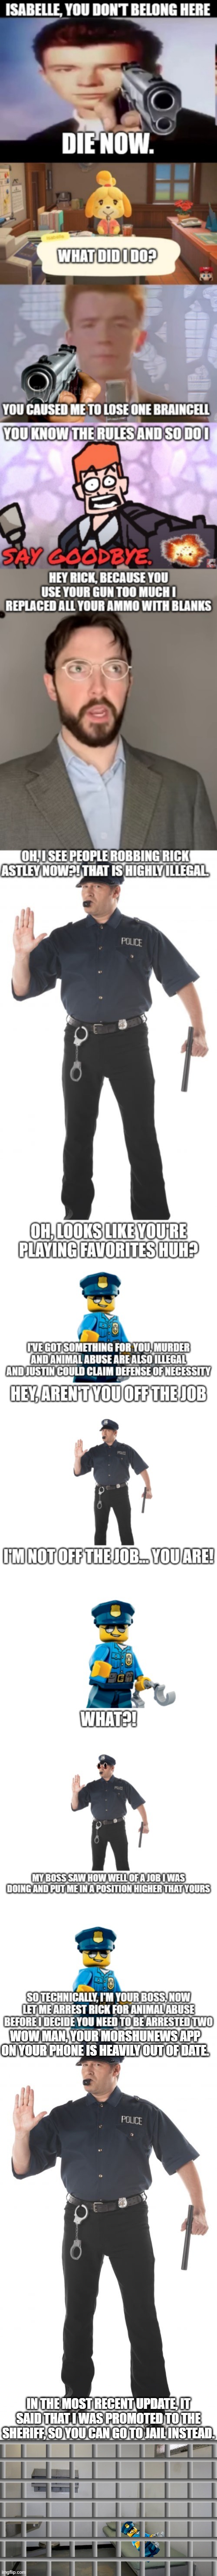 WOW MAN, YOUR MORSHUNEWS APP ON YOUR PHONE IS HEAVILY OUT OF DATE. IN THE MOST RECENT UPDATE, IT SAID THAT I WAS PROMOTED TO THE SHERIFF, SO YOU CAN GO TO JAIL INSTEAD. | image tagged in memes,stop cop,prison cell inside | made w/ Imgflip meme maker